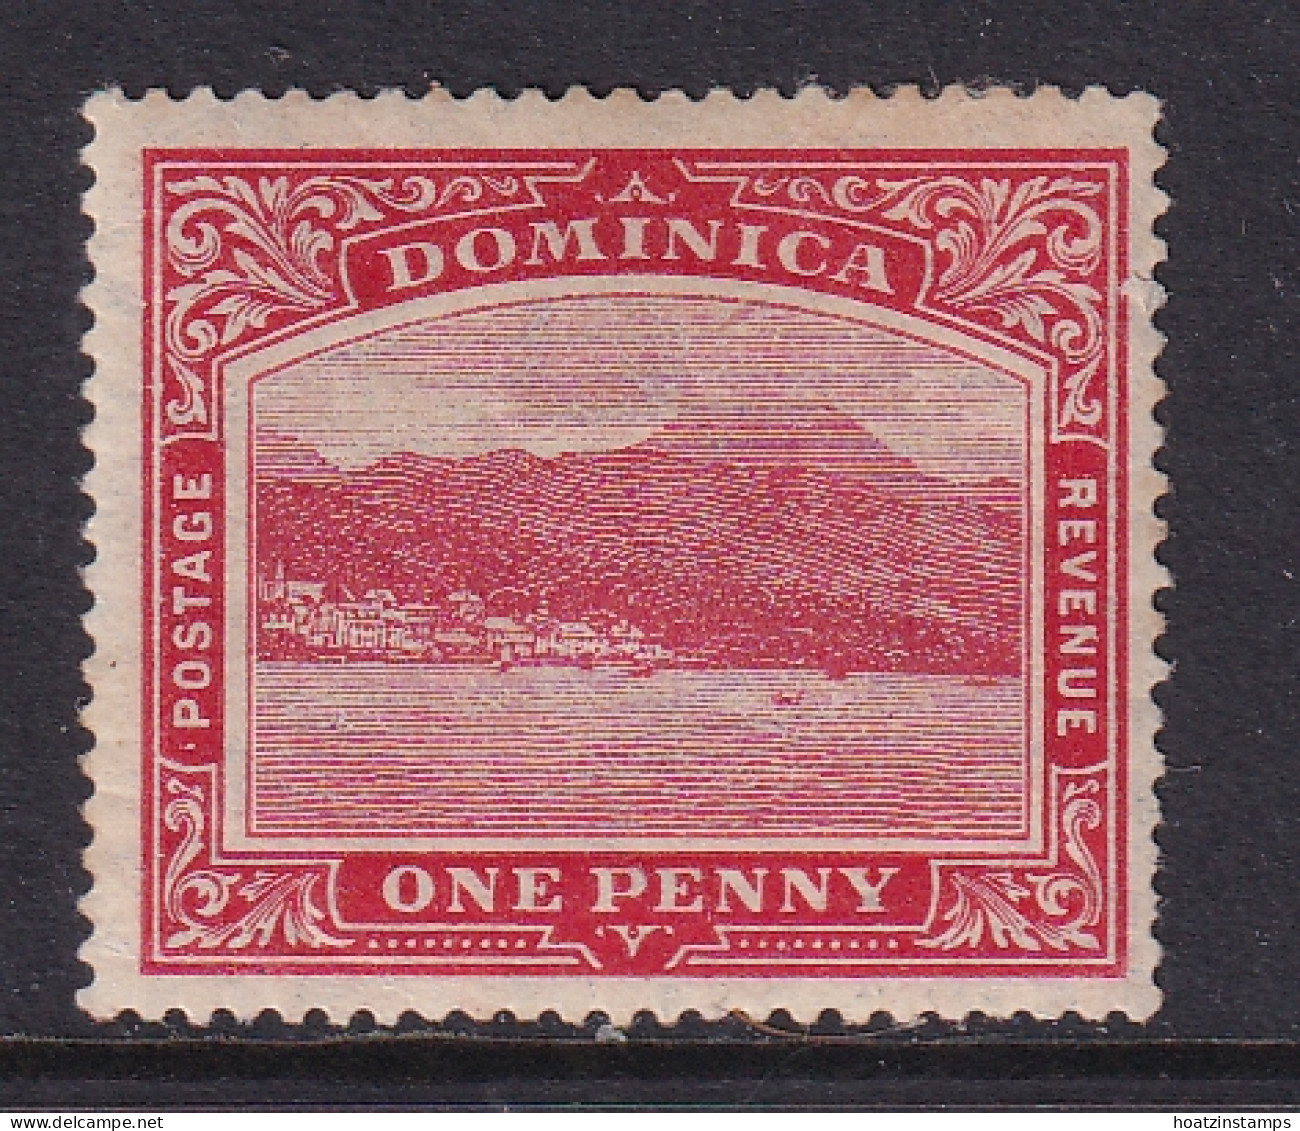 Dominica: 1908/20   Rouseau From The Sea    SG48    1d   Carmine-red      MH - Dominica (...-1978)